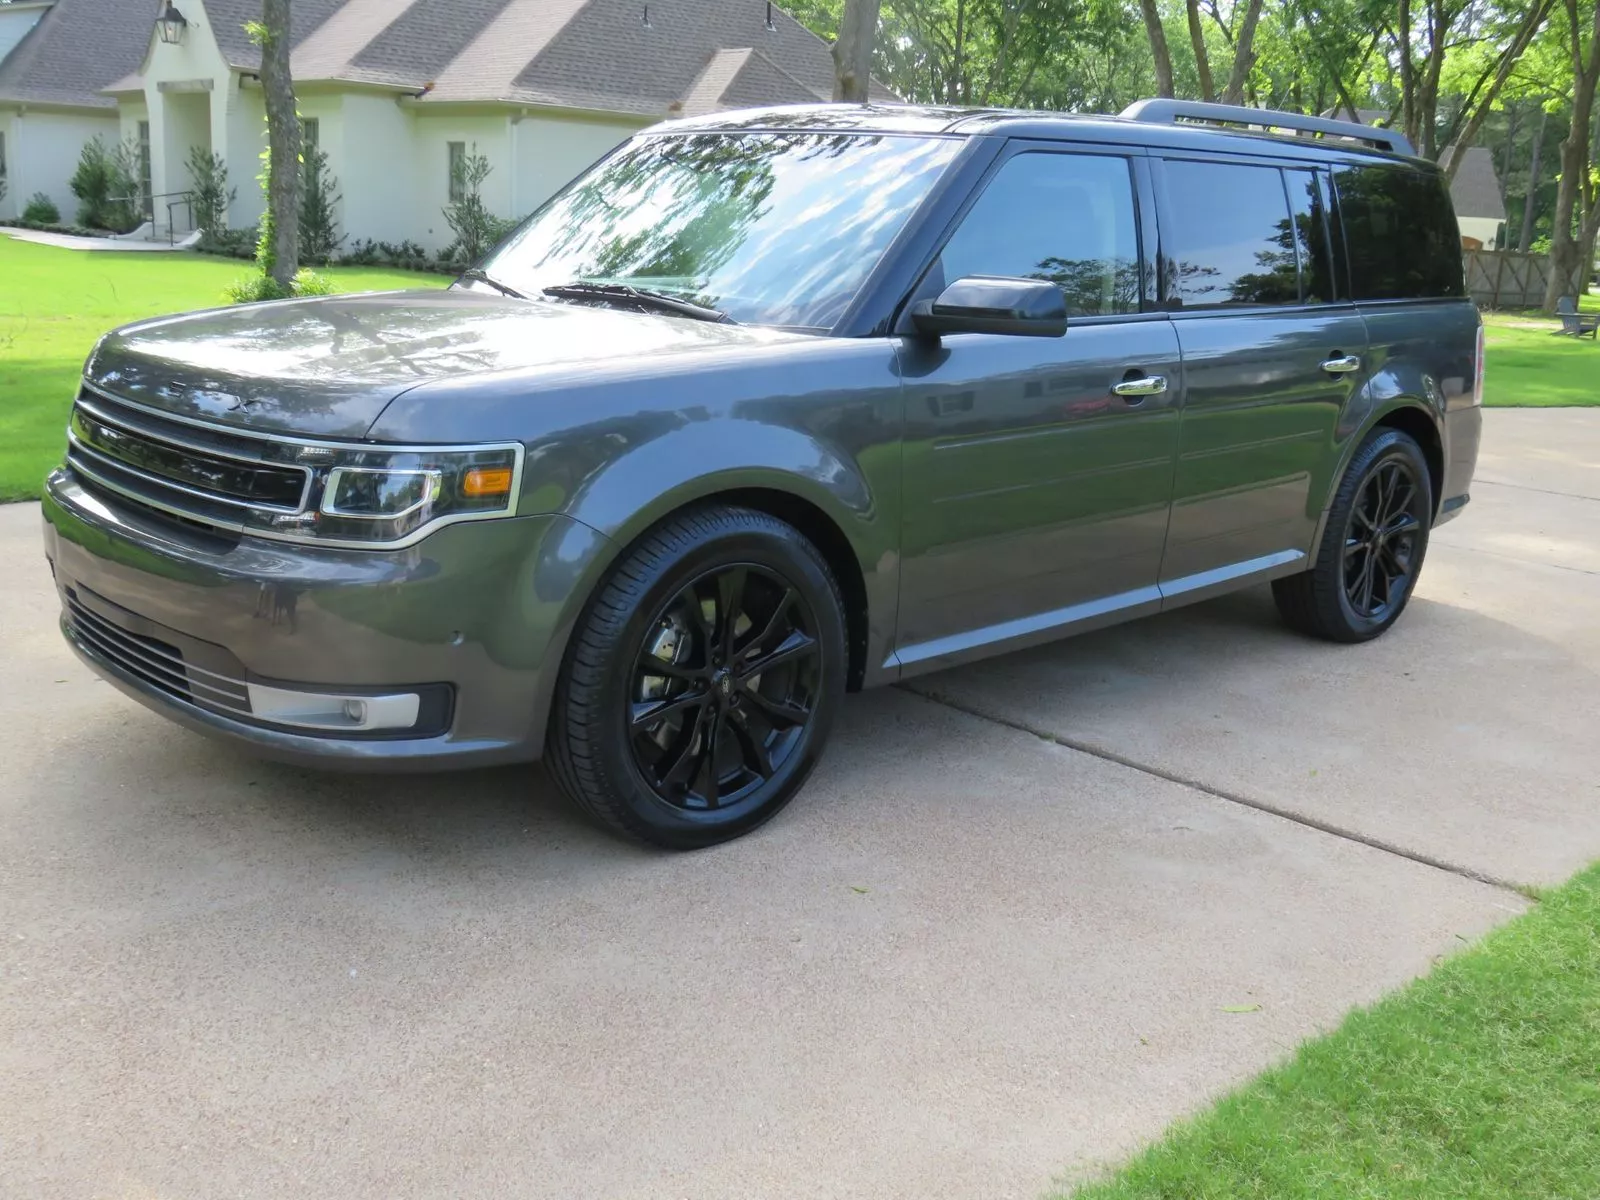 2019 Ford Flex for sale